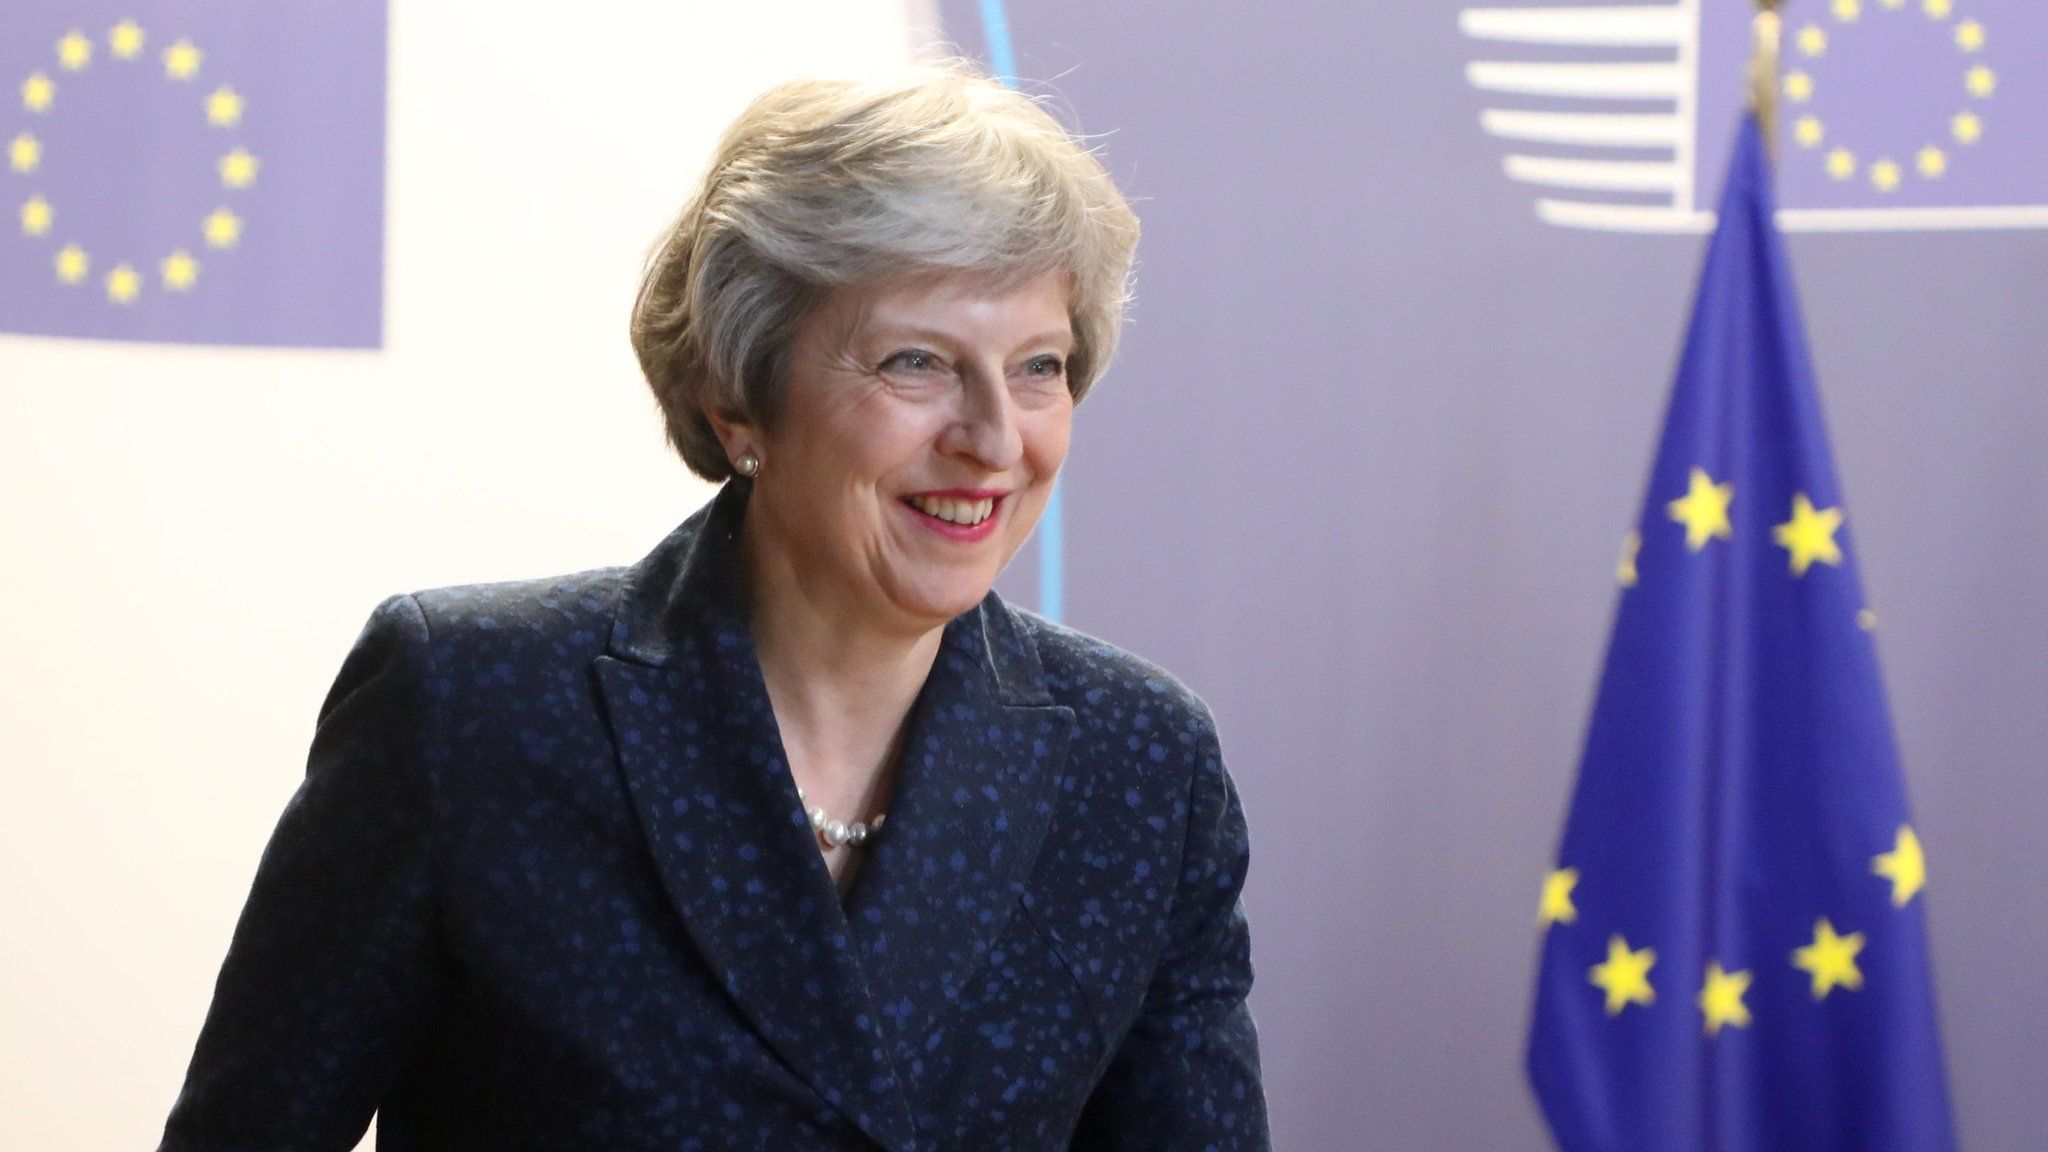 Theresa May at EU leaders summit in Brussels on 29 June 2018